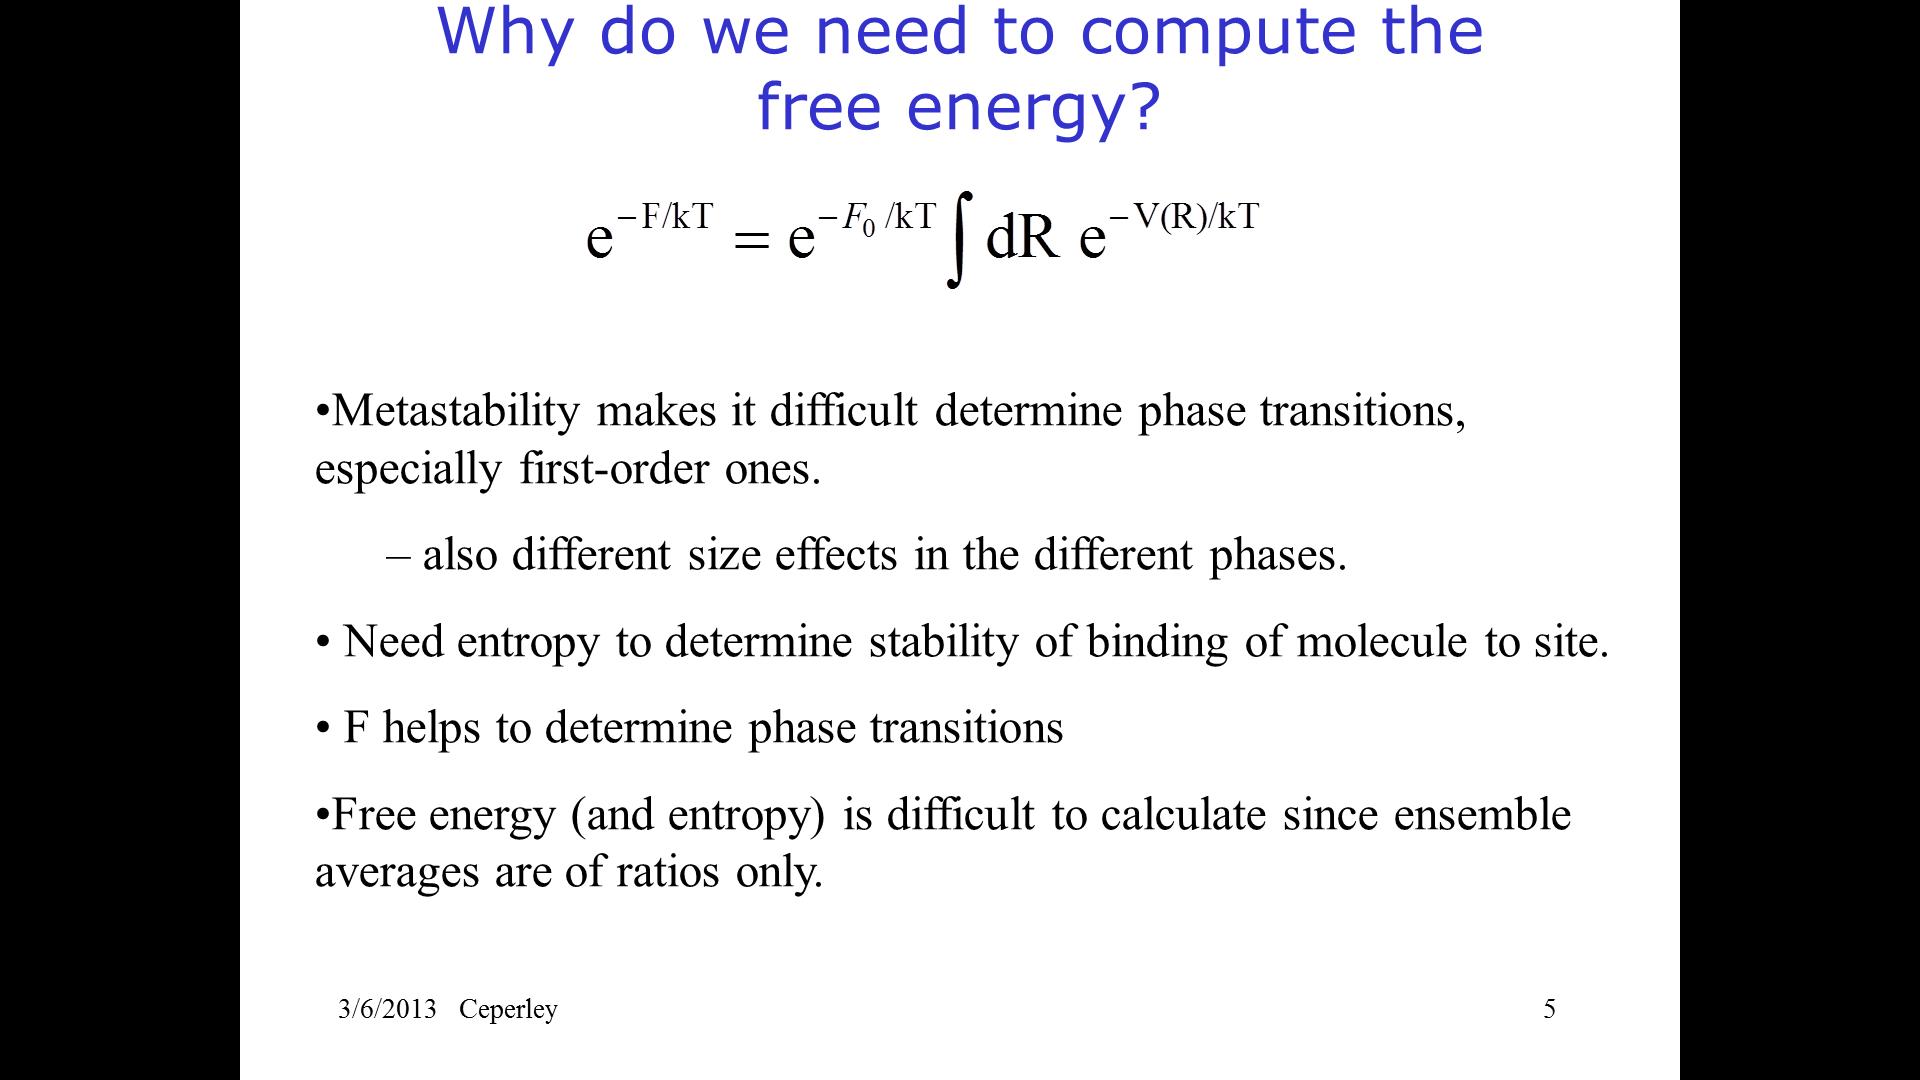 Why do we need to compute the free energy?